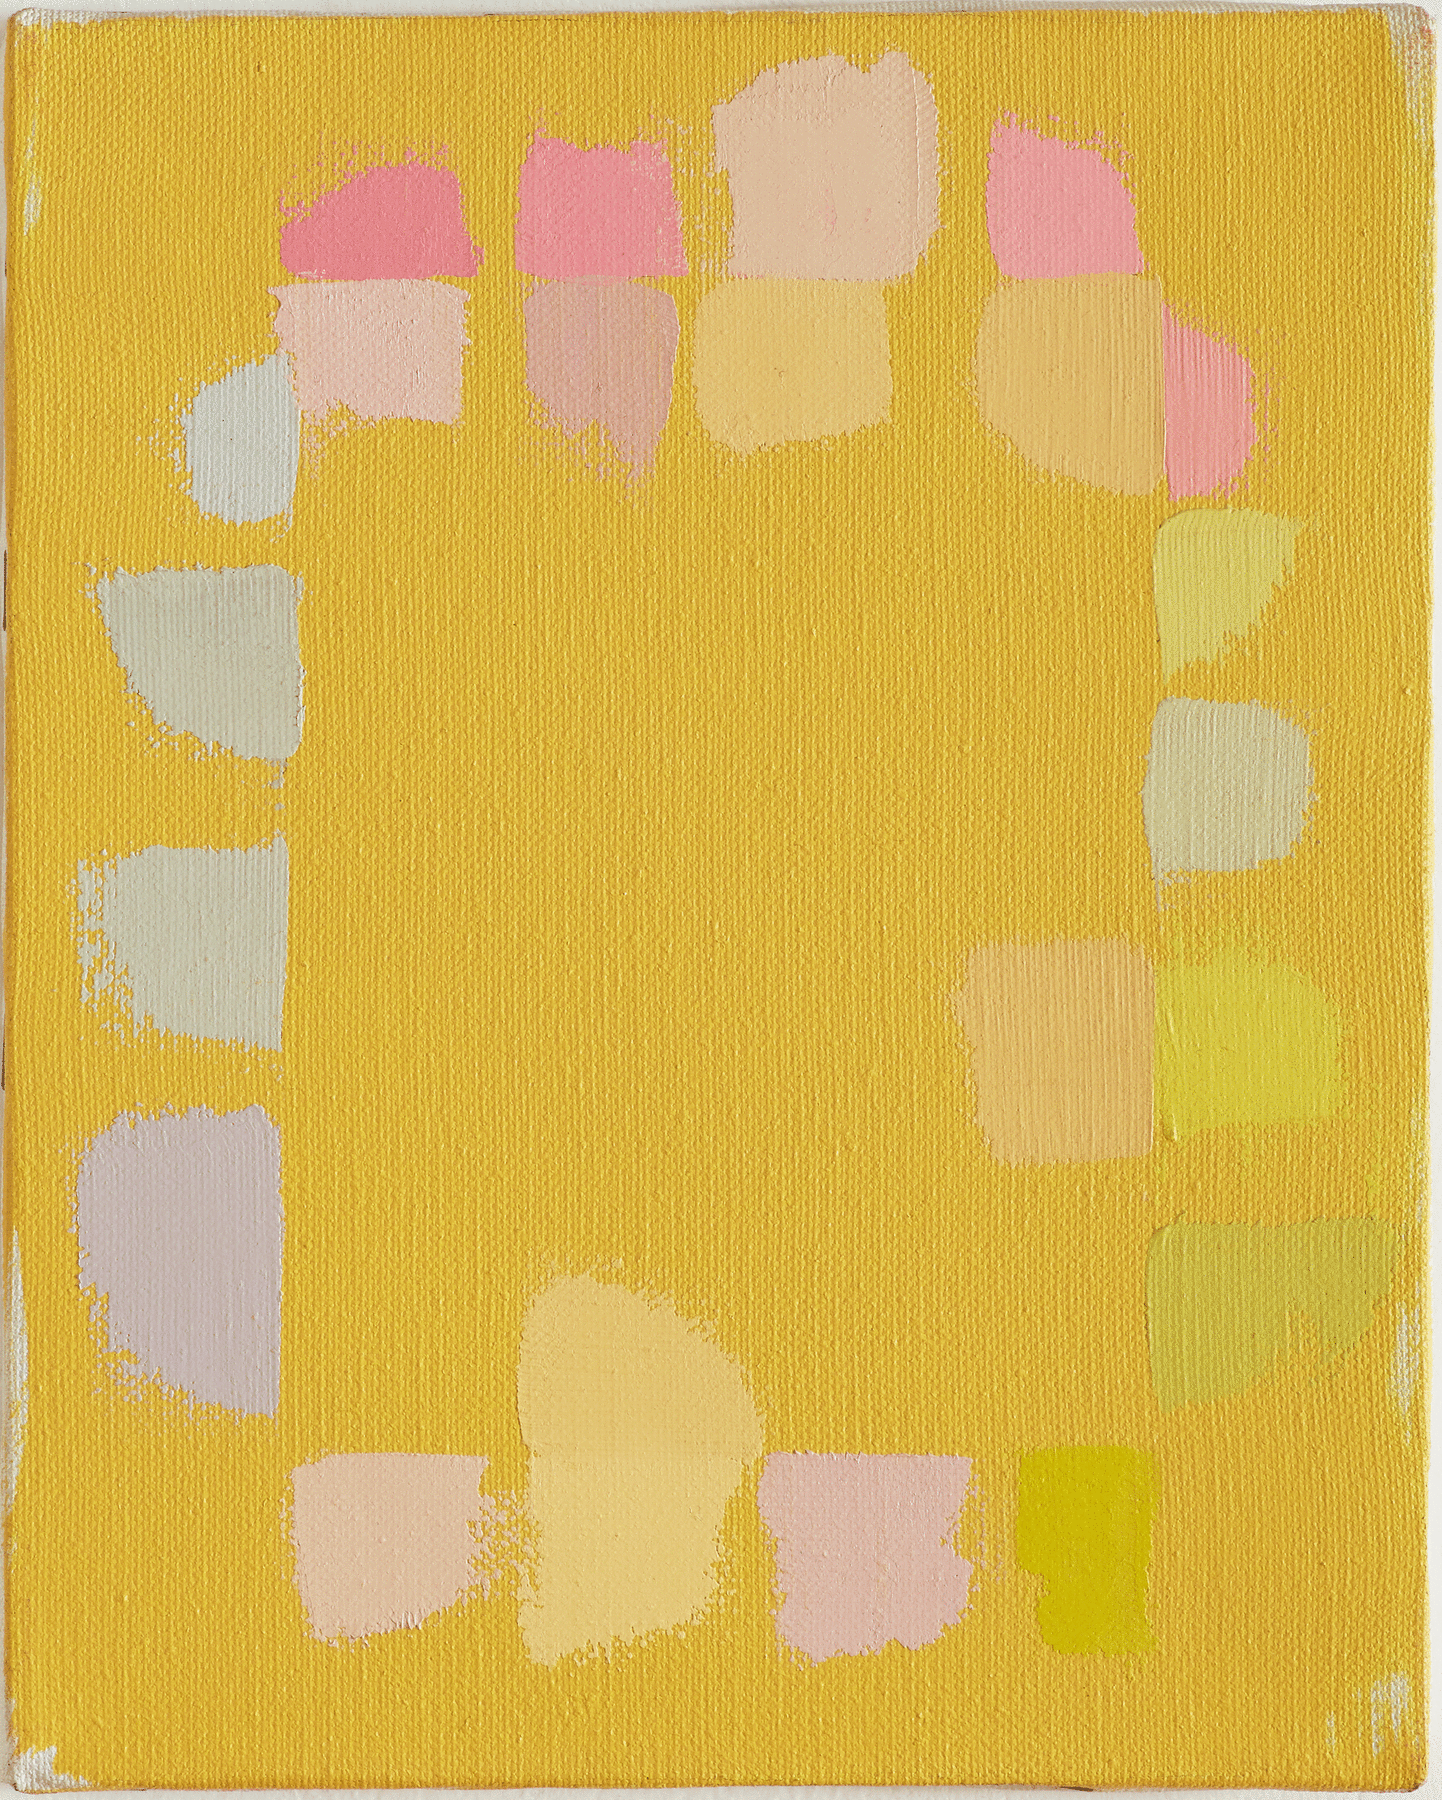 Small painting by Doug Ohlson with a golden yellow ground under pastel bursts of color around the edges of the canvas